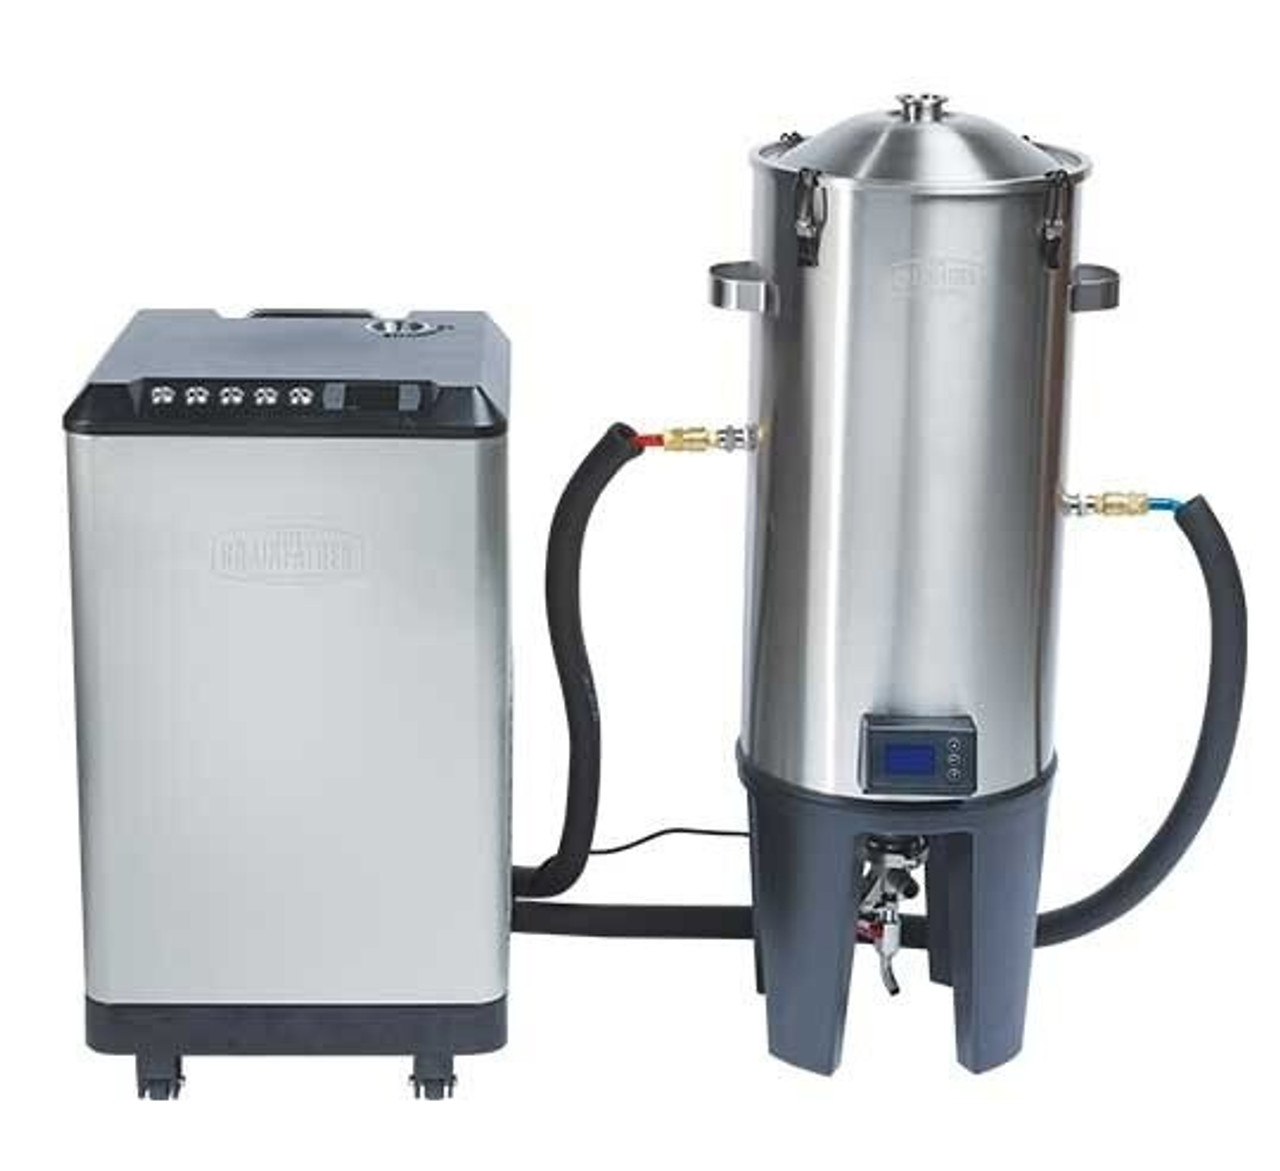 The Grainfather - Glycol Chiller w/ Cooling Connection Kit